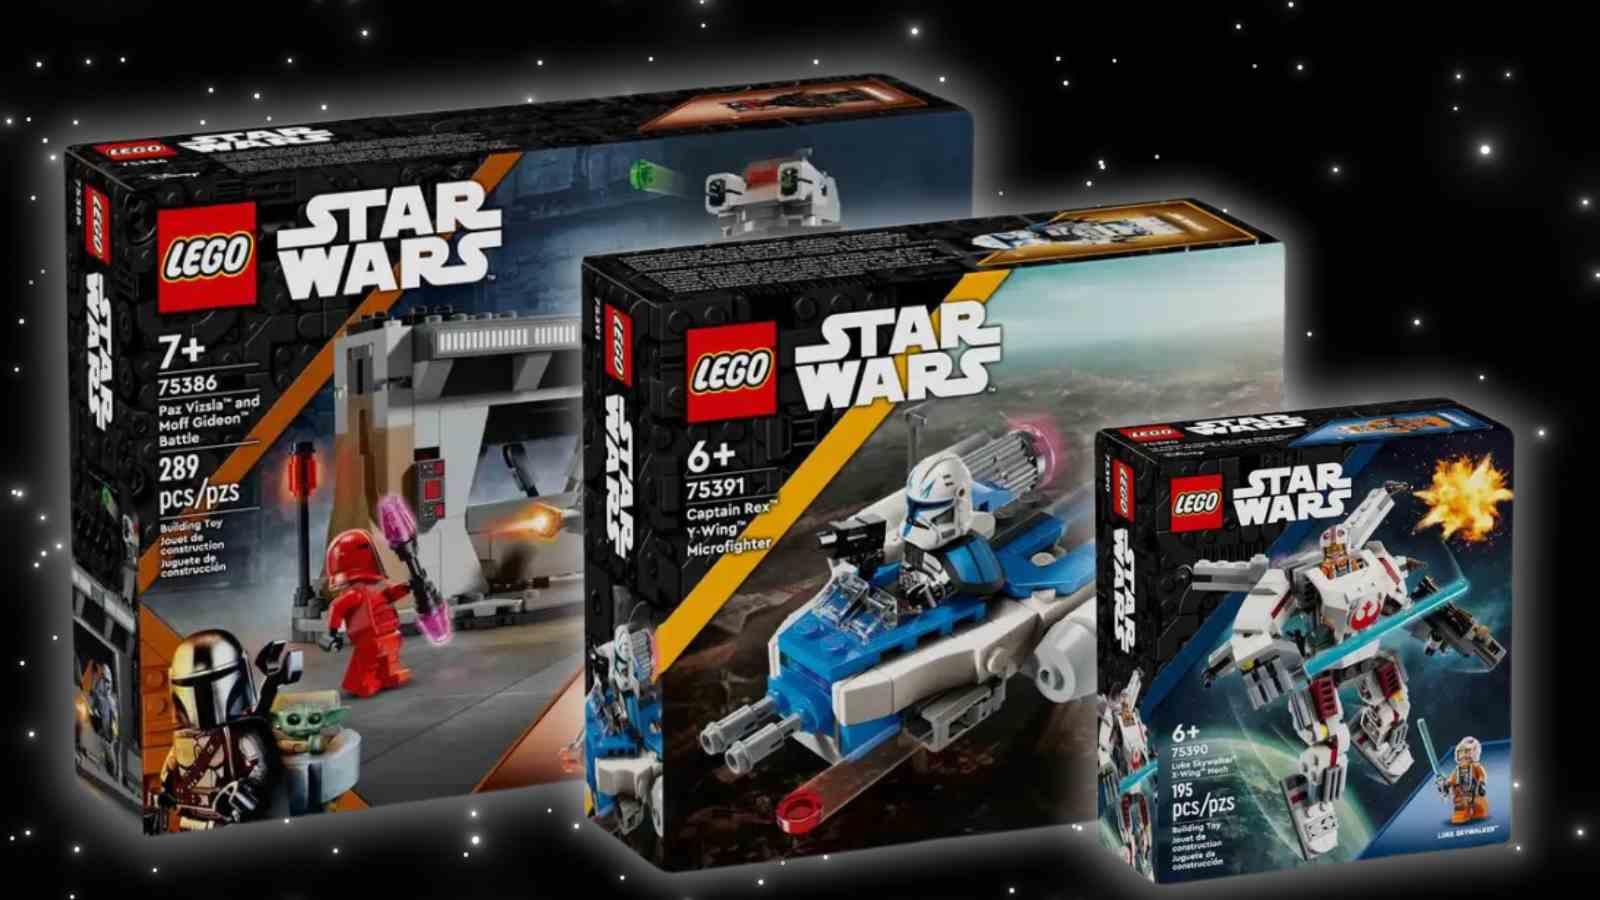 Three of the upcoming LEGO Star Wars sets on a galaxy background